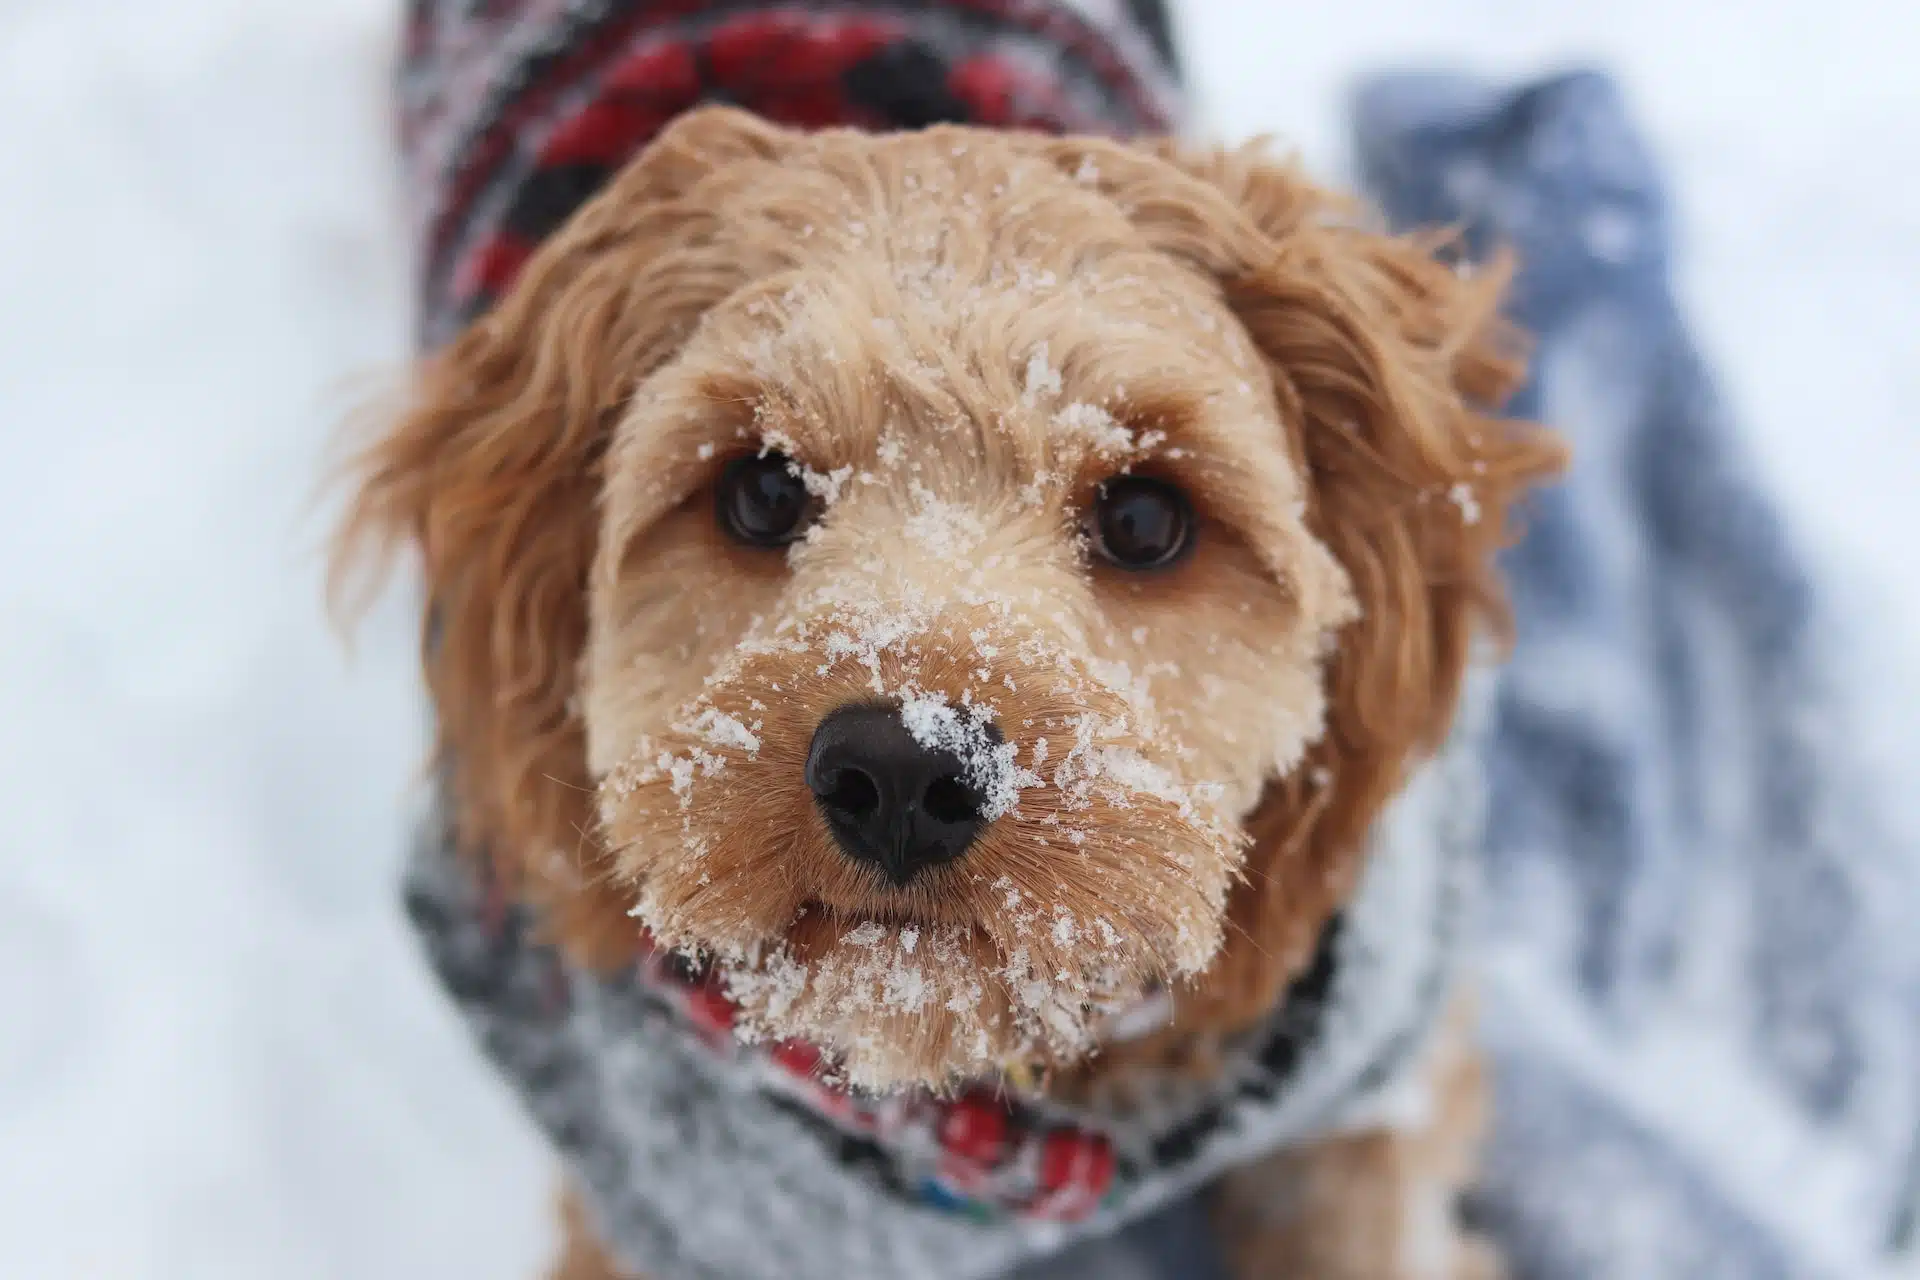 This dog's face is dusted with snow and appears slightly cold. Fortunately, it's equipped for the winter cold with a cozy dog jersey.